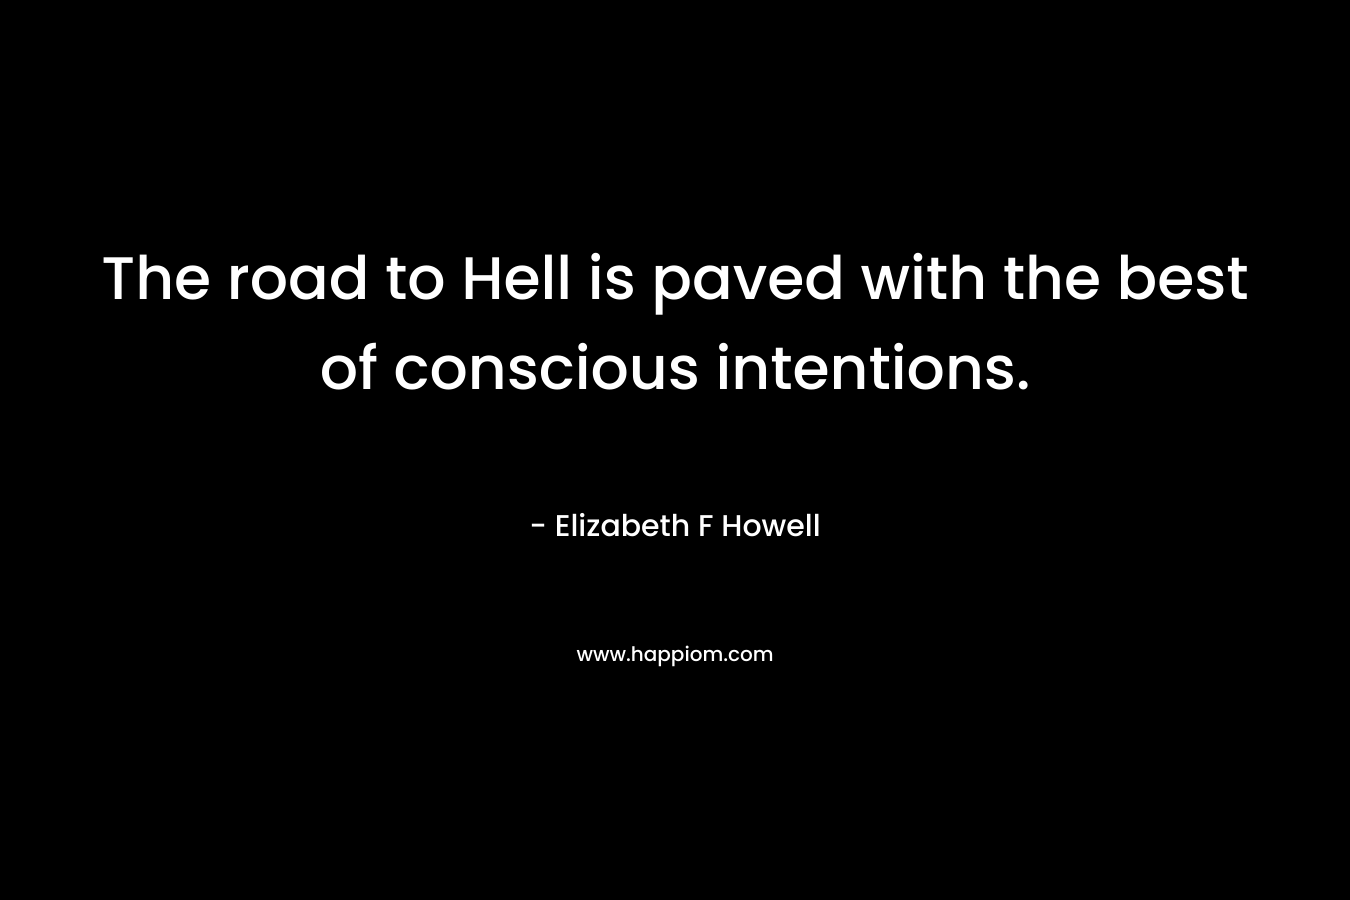 The road to Hell is paved with the best of conscious intentions. – Elizabeth F Howell